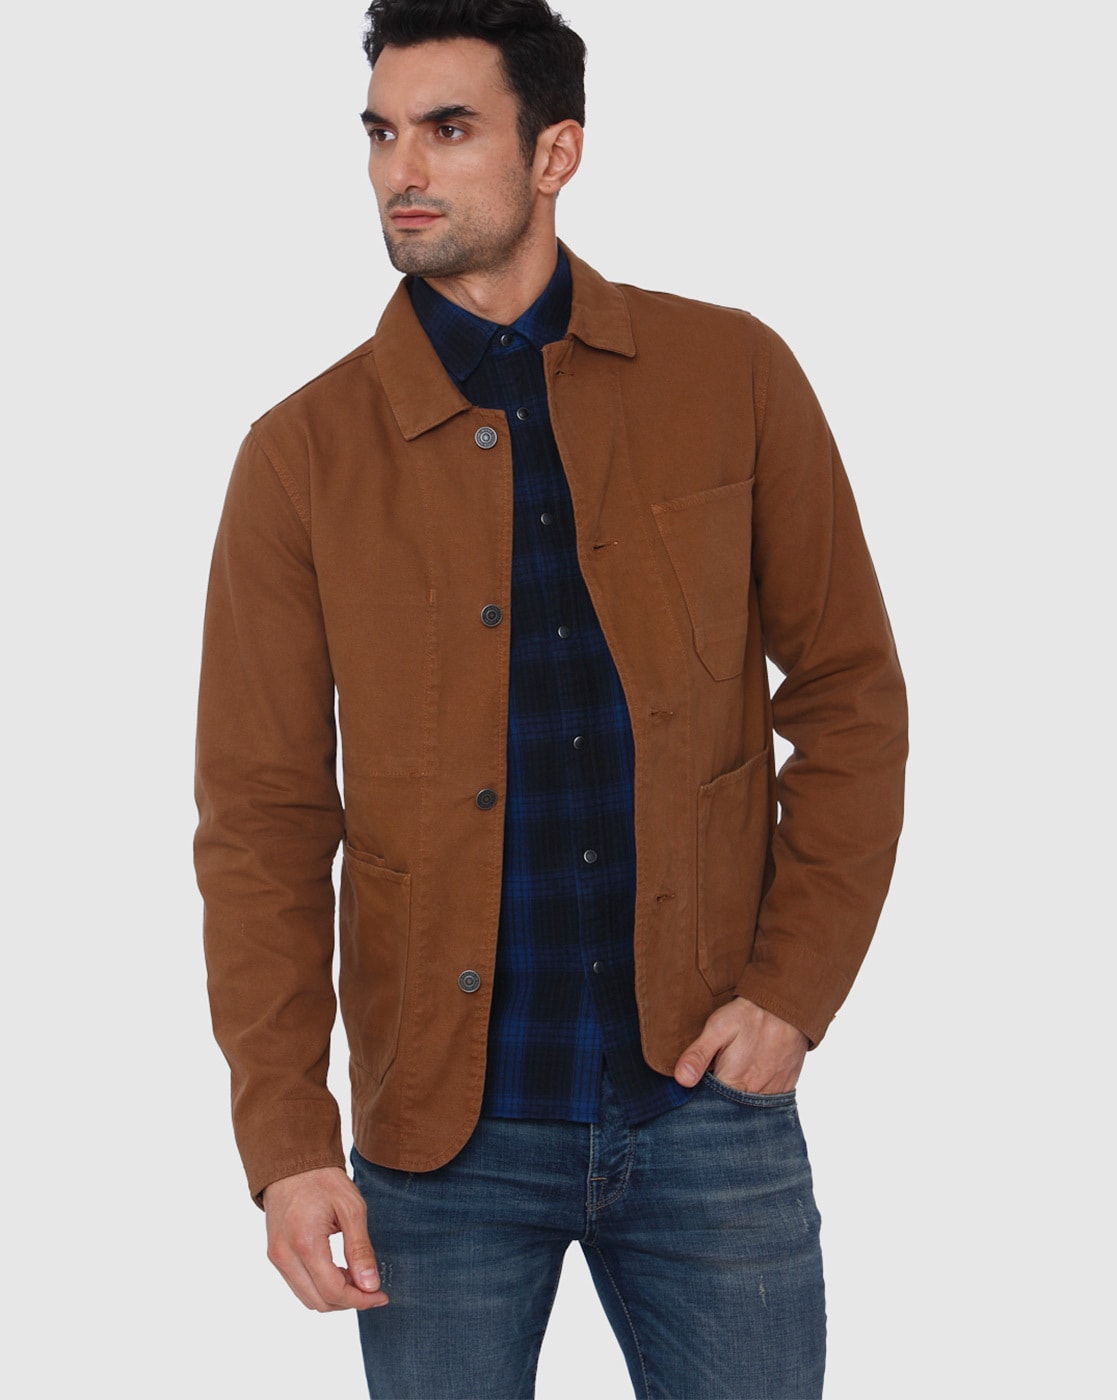 Scully Mens Brown Cotton Blend Faux Jean Denim Jacket – The Western Company